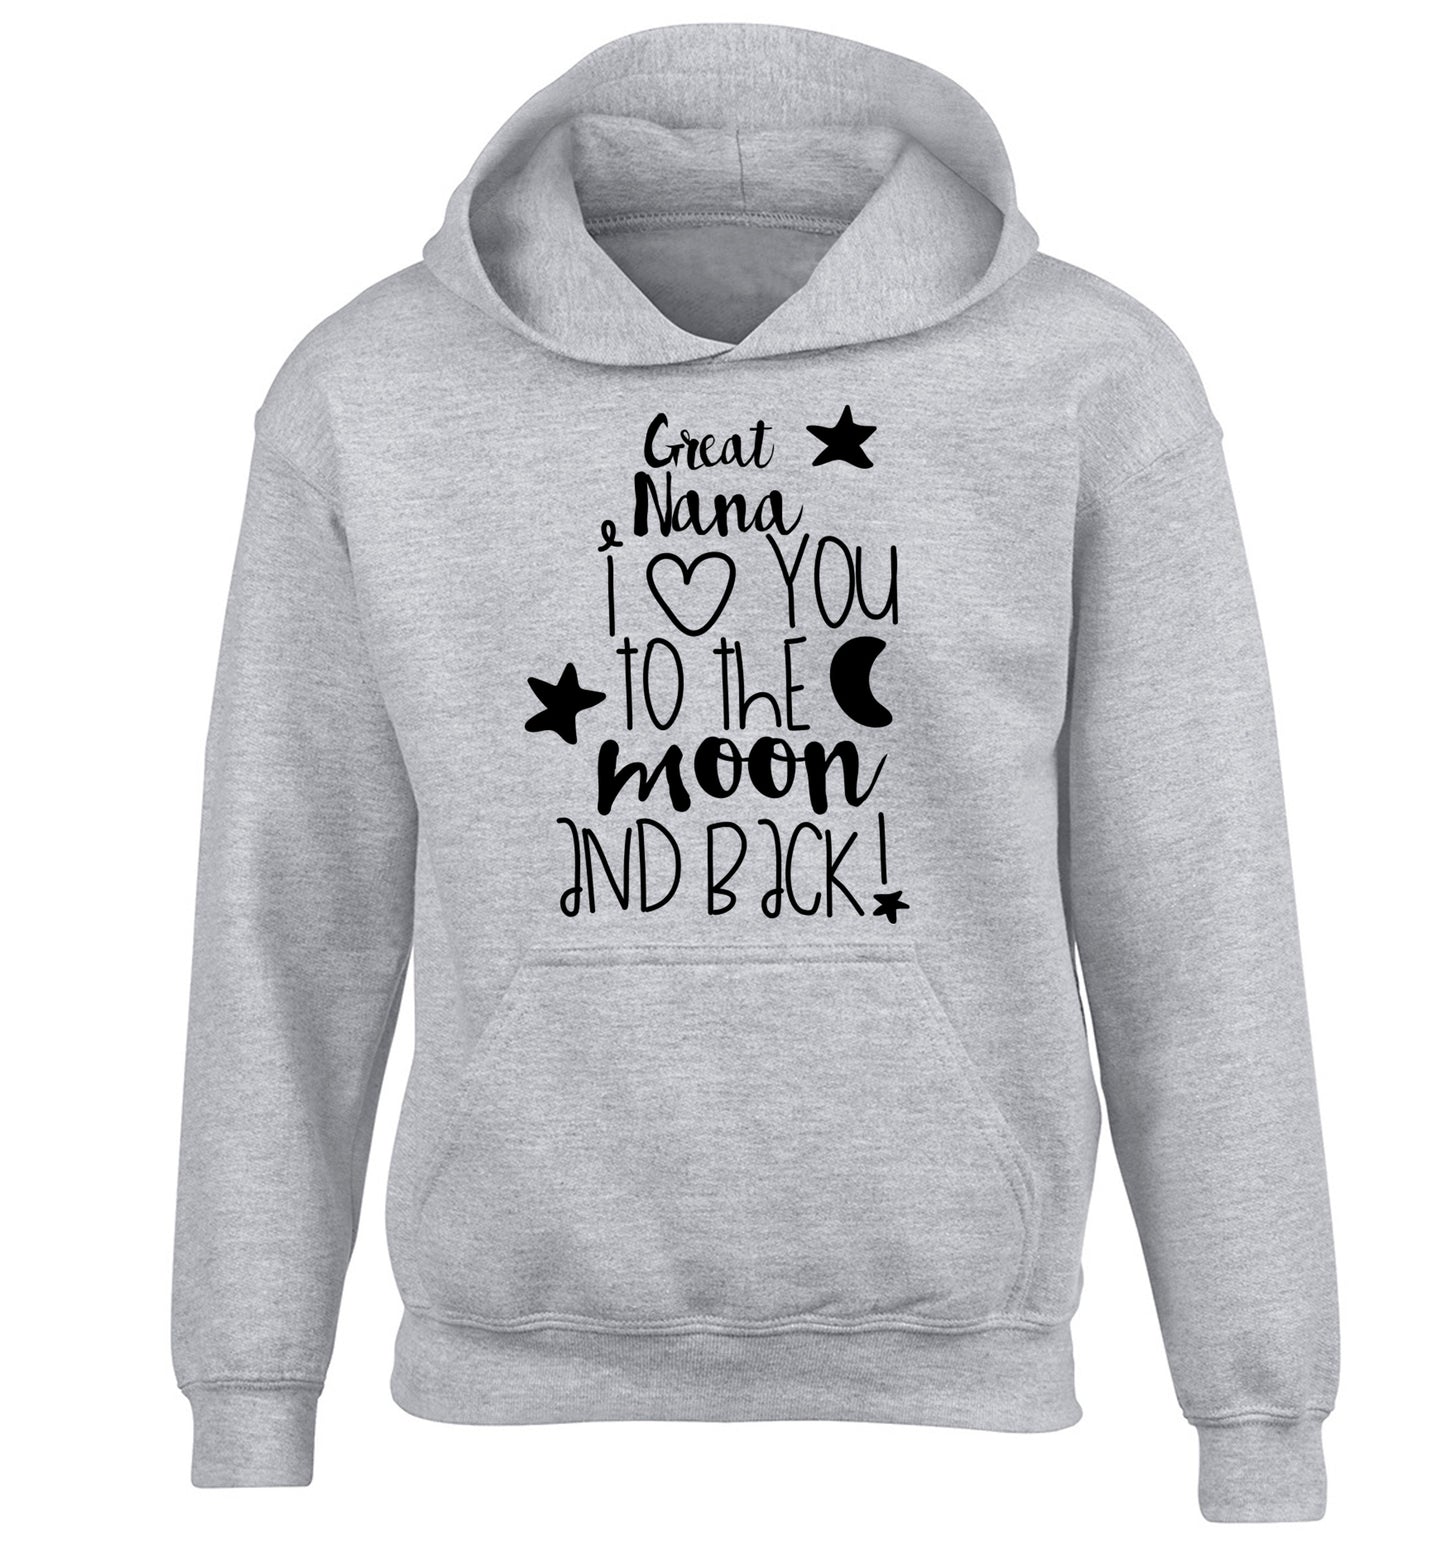 Great Nana I love you to the moon and back children's grey hoodie 12-14 Years